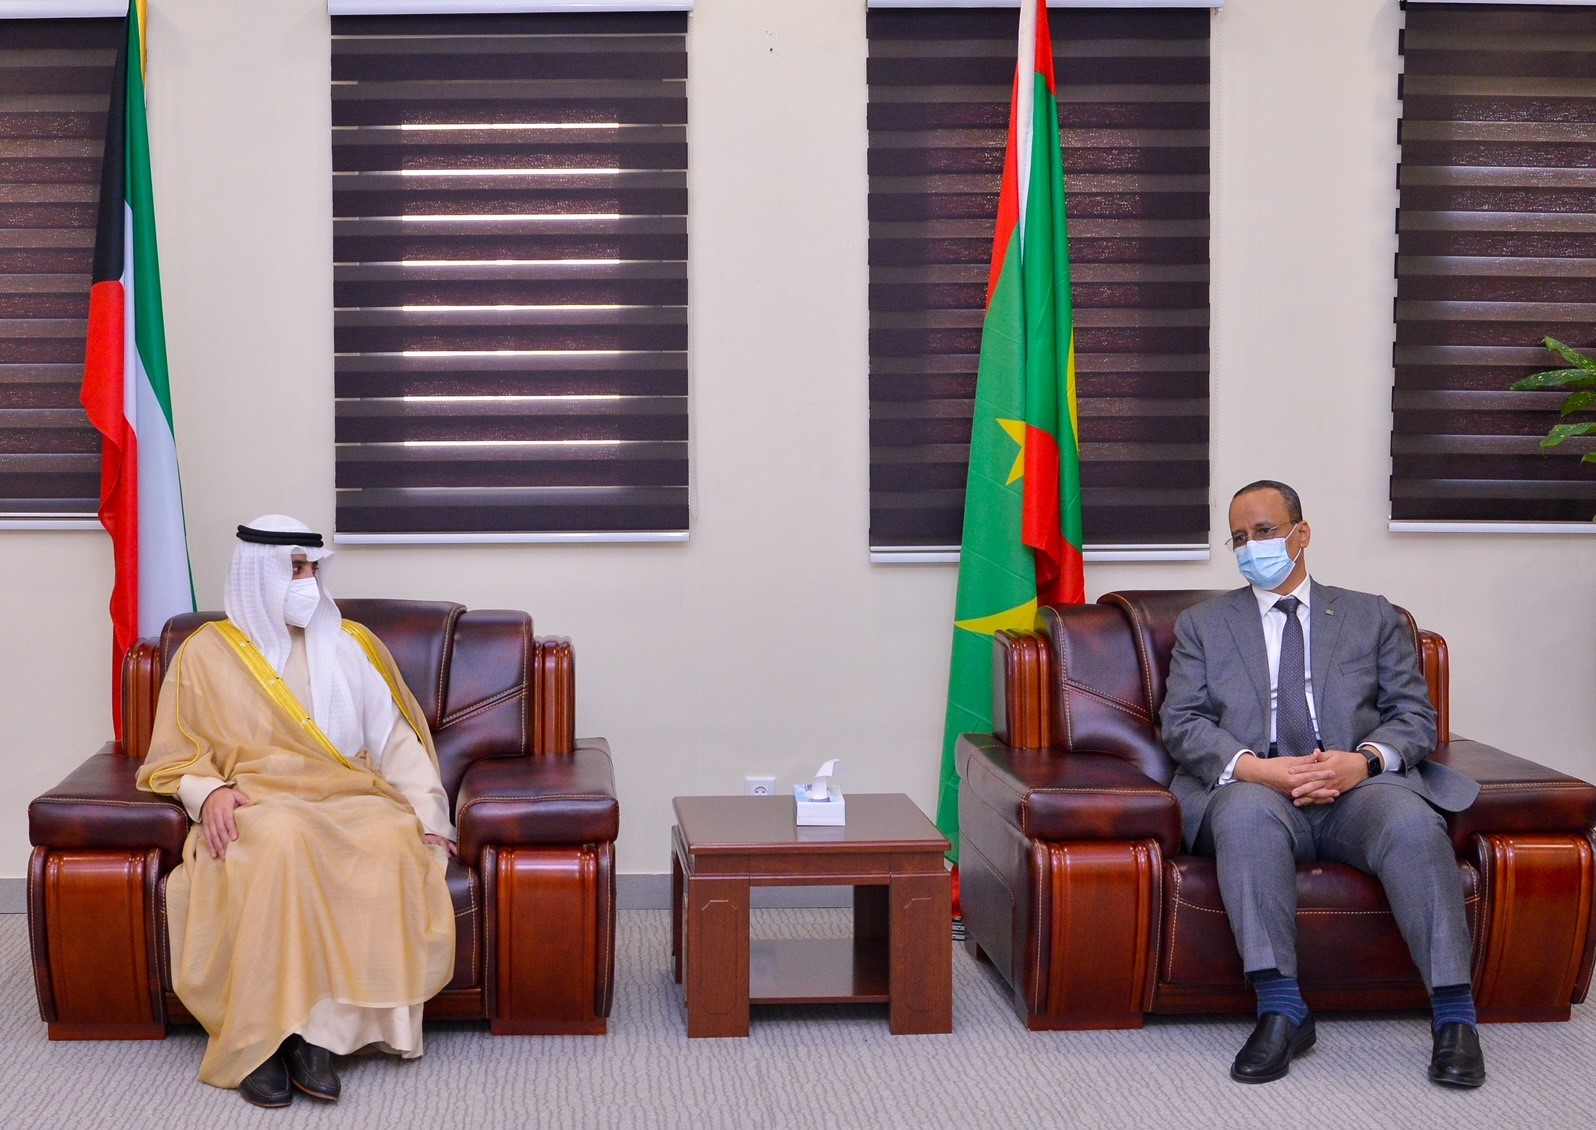 Kuwait's Foreign Minister meets with Mauritania counterpart